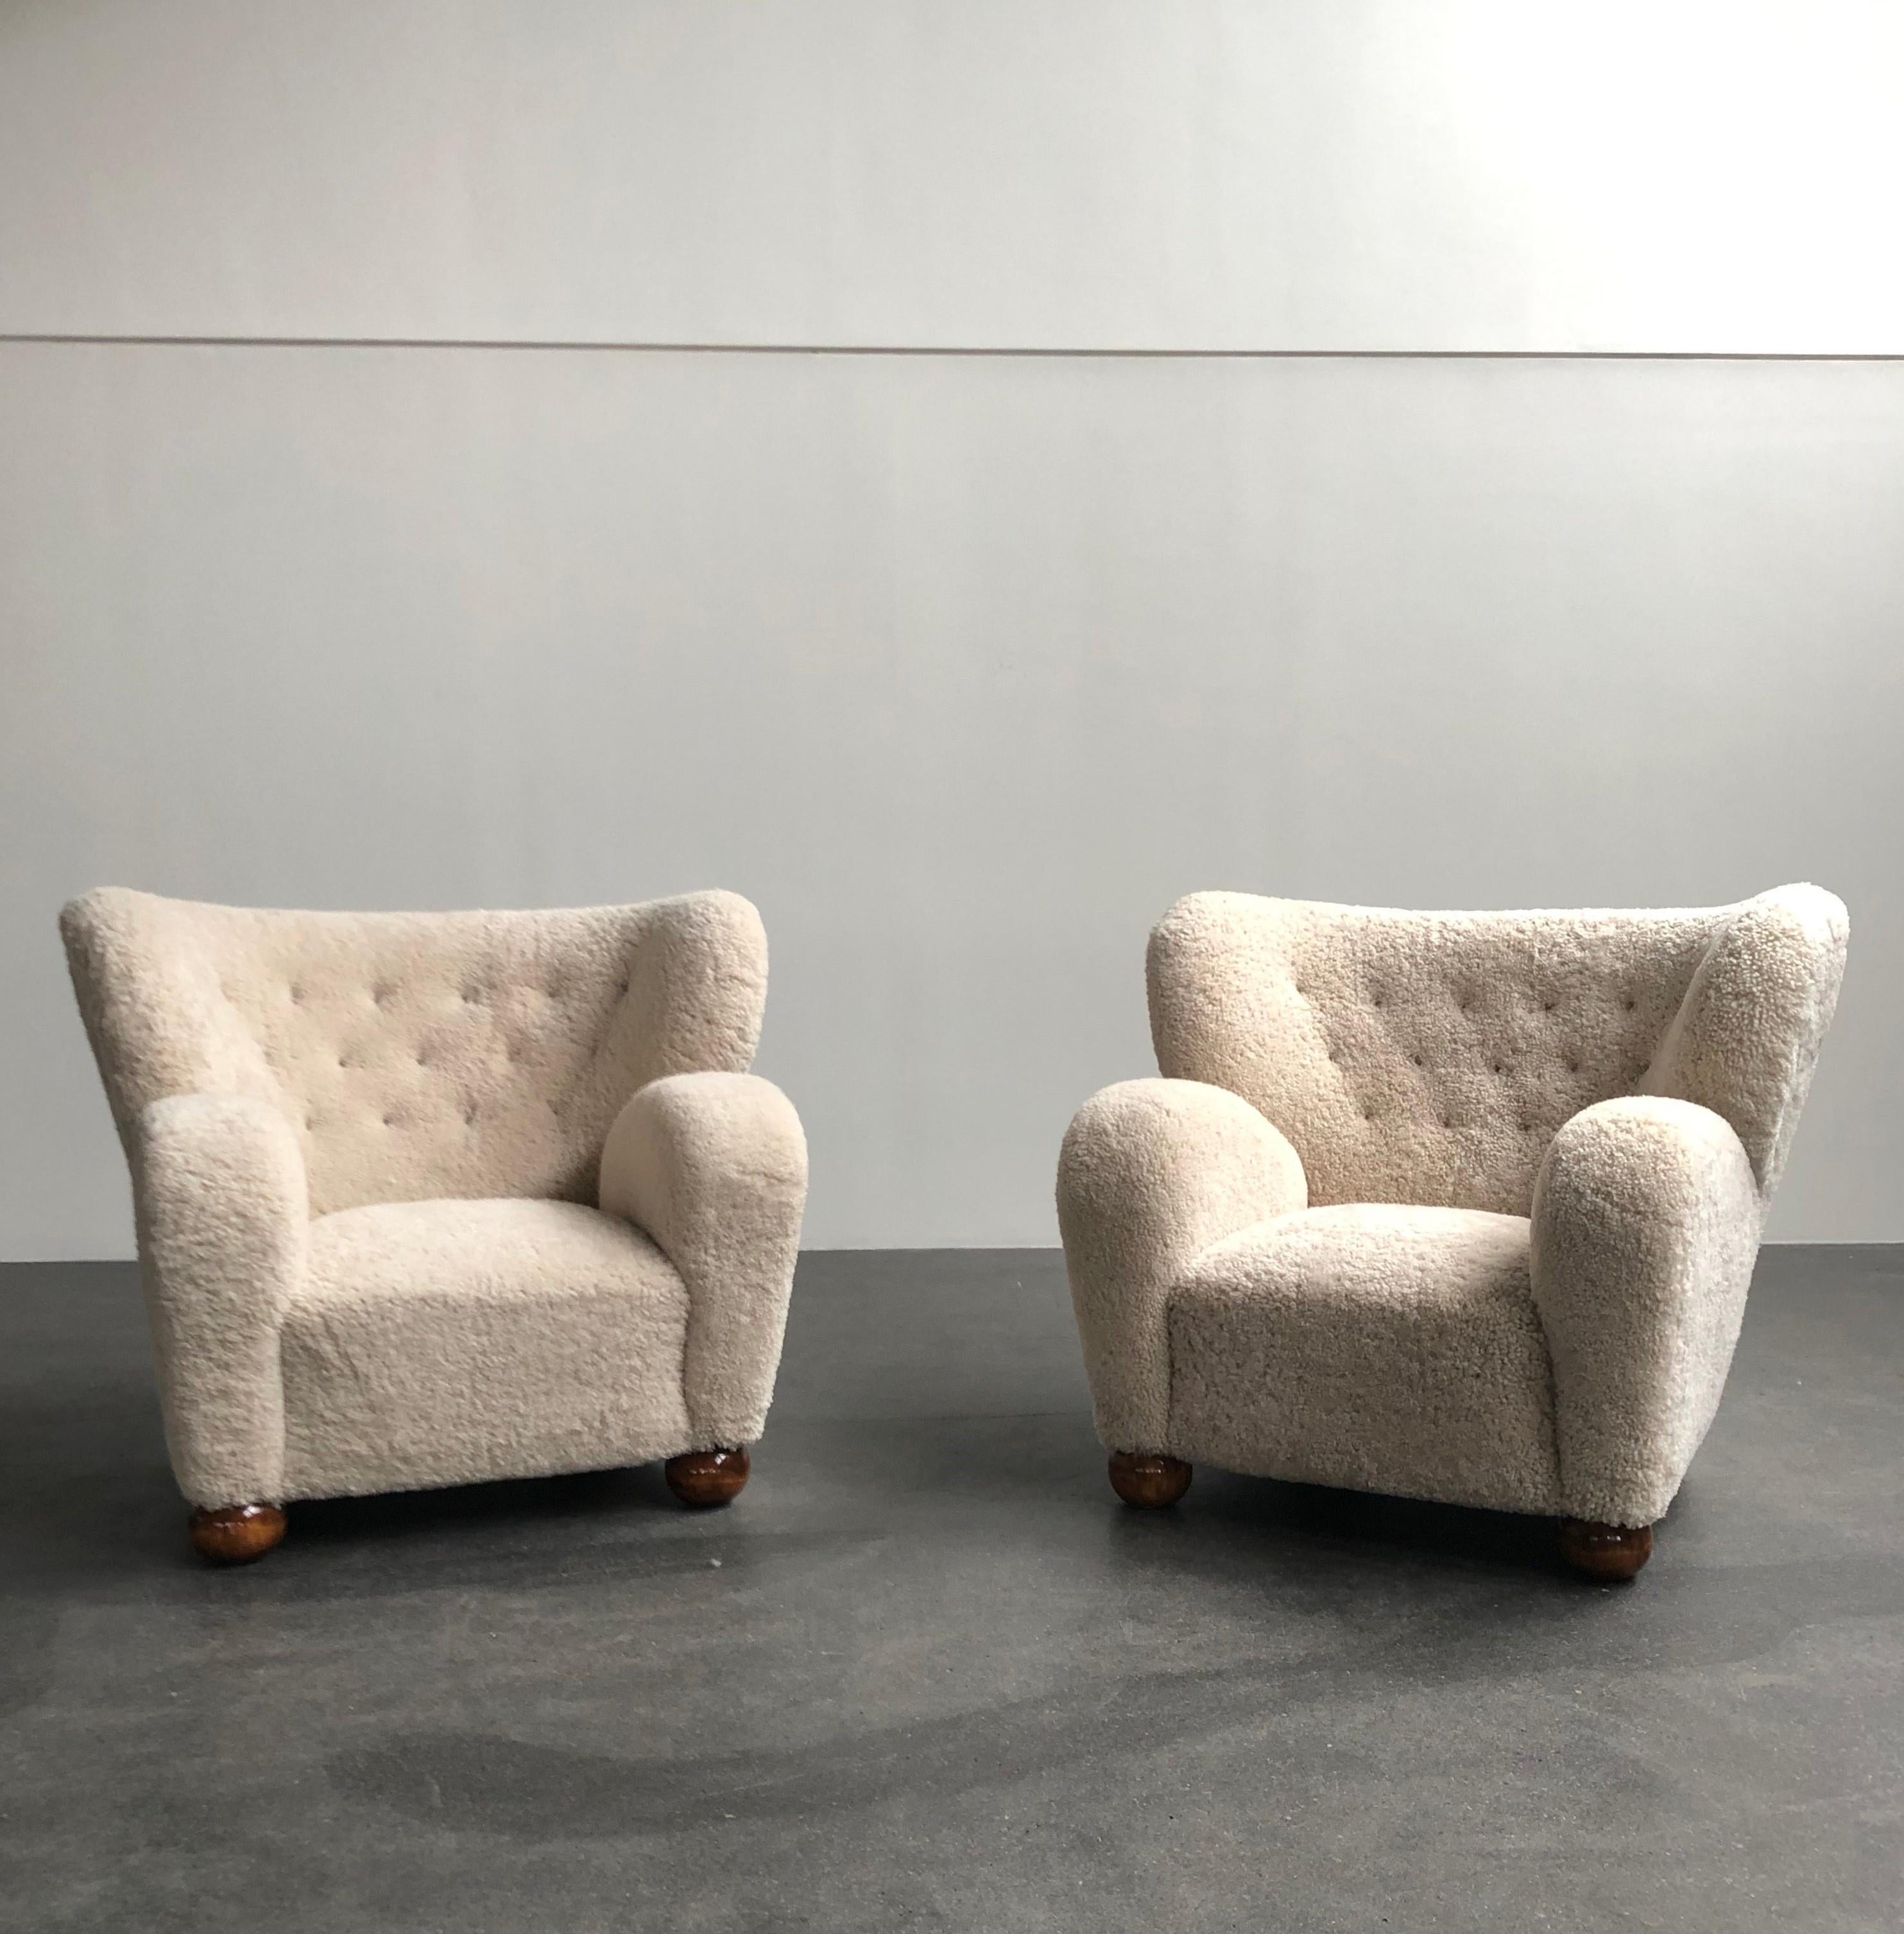 Finnish Marta Blomstedt Pair of Easy Chairs in Sheepskin for Hotel Aulanko Finland, 1939 For Sale